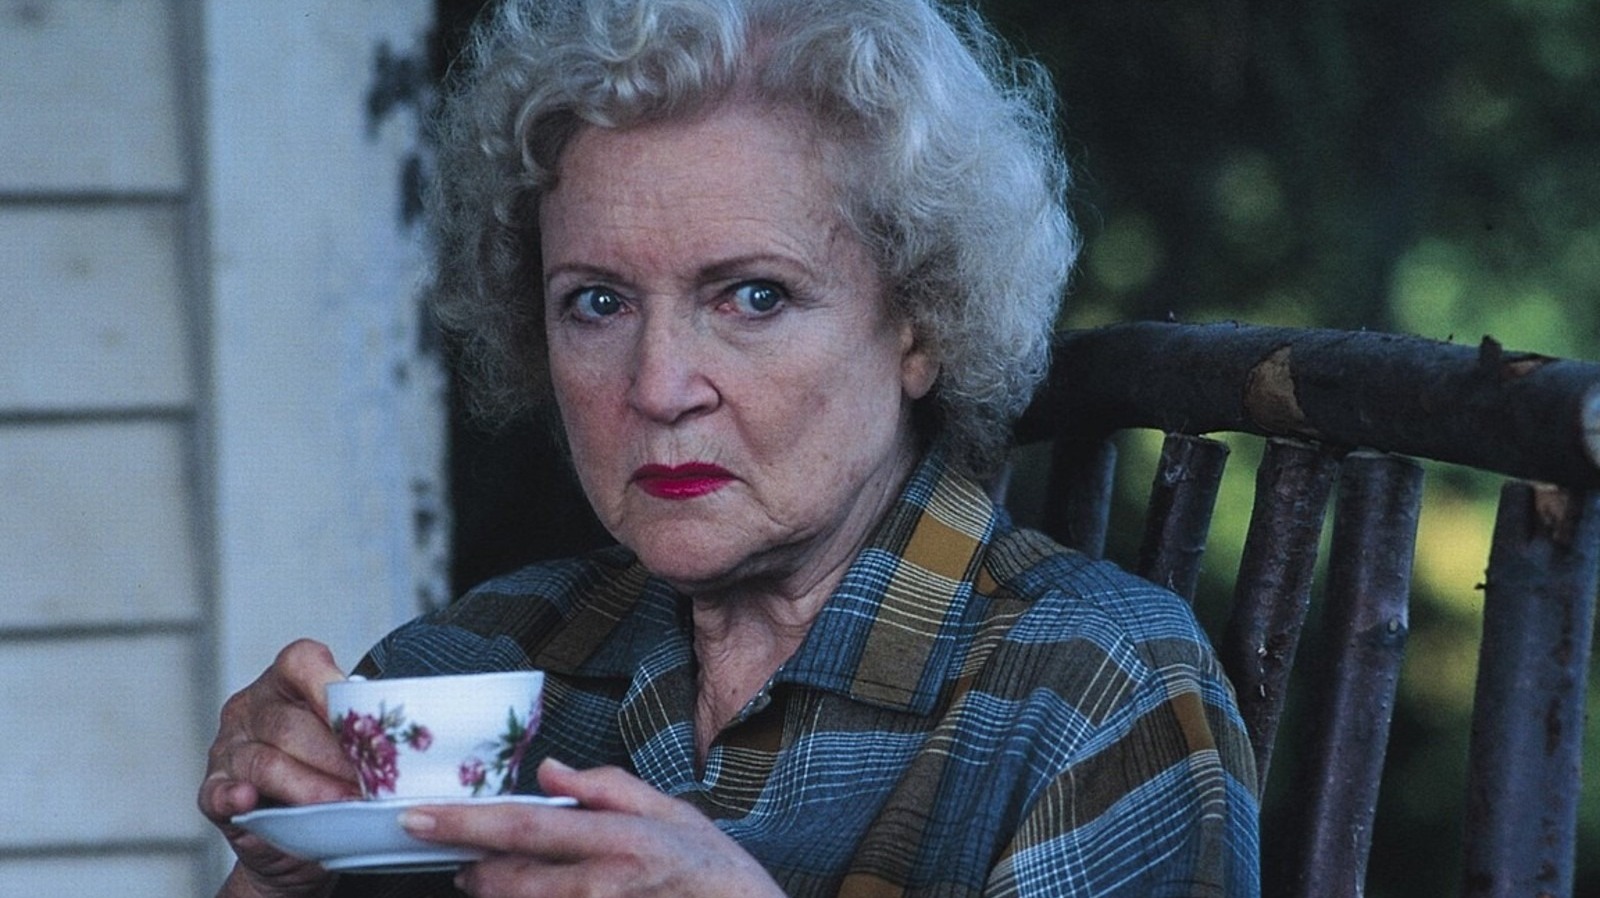 Betty White put Lake Placid on the map with her character, Delores Bickerma...